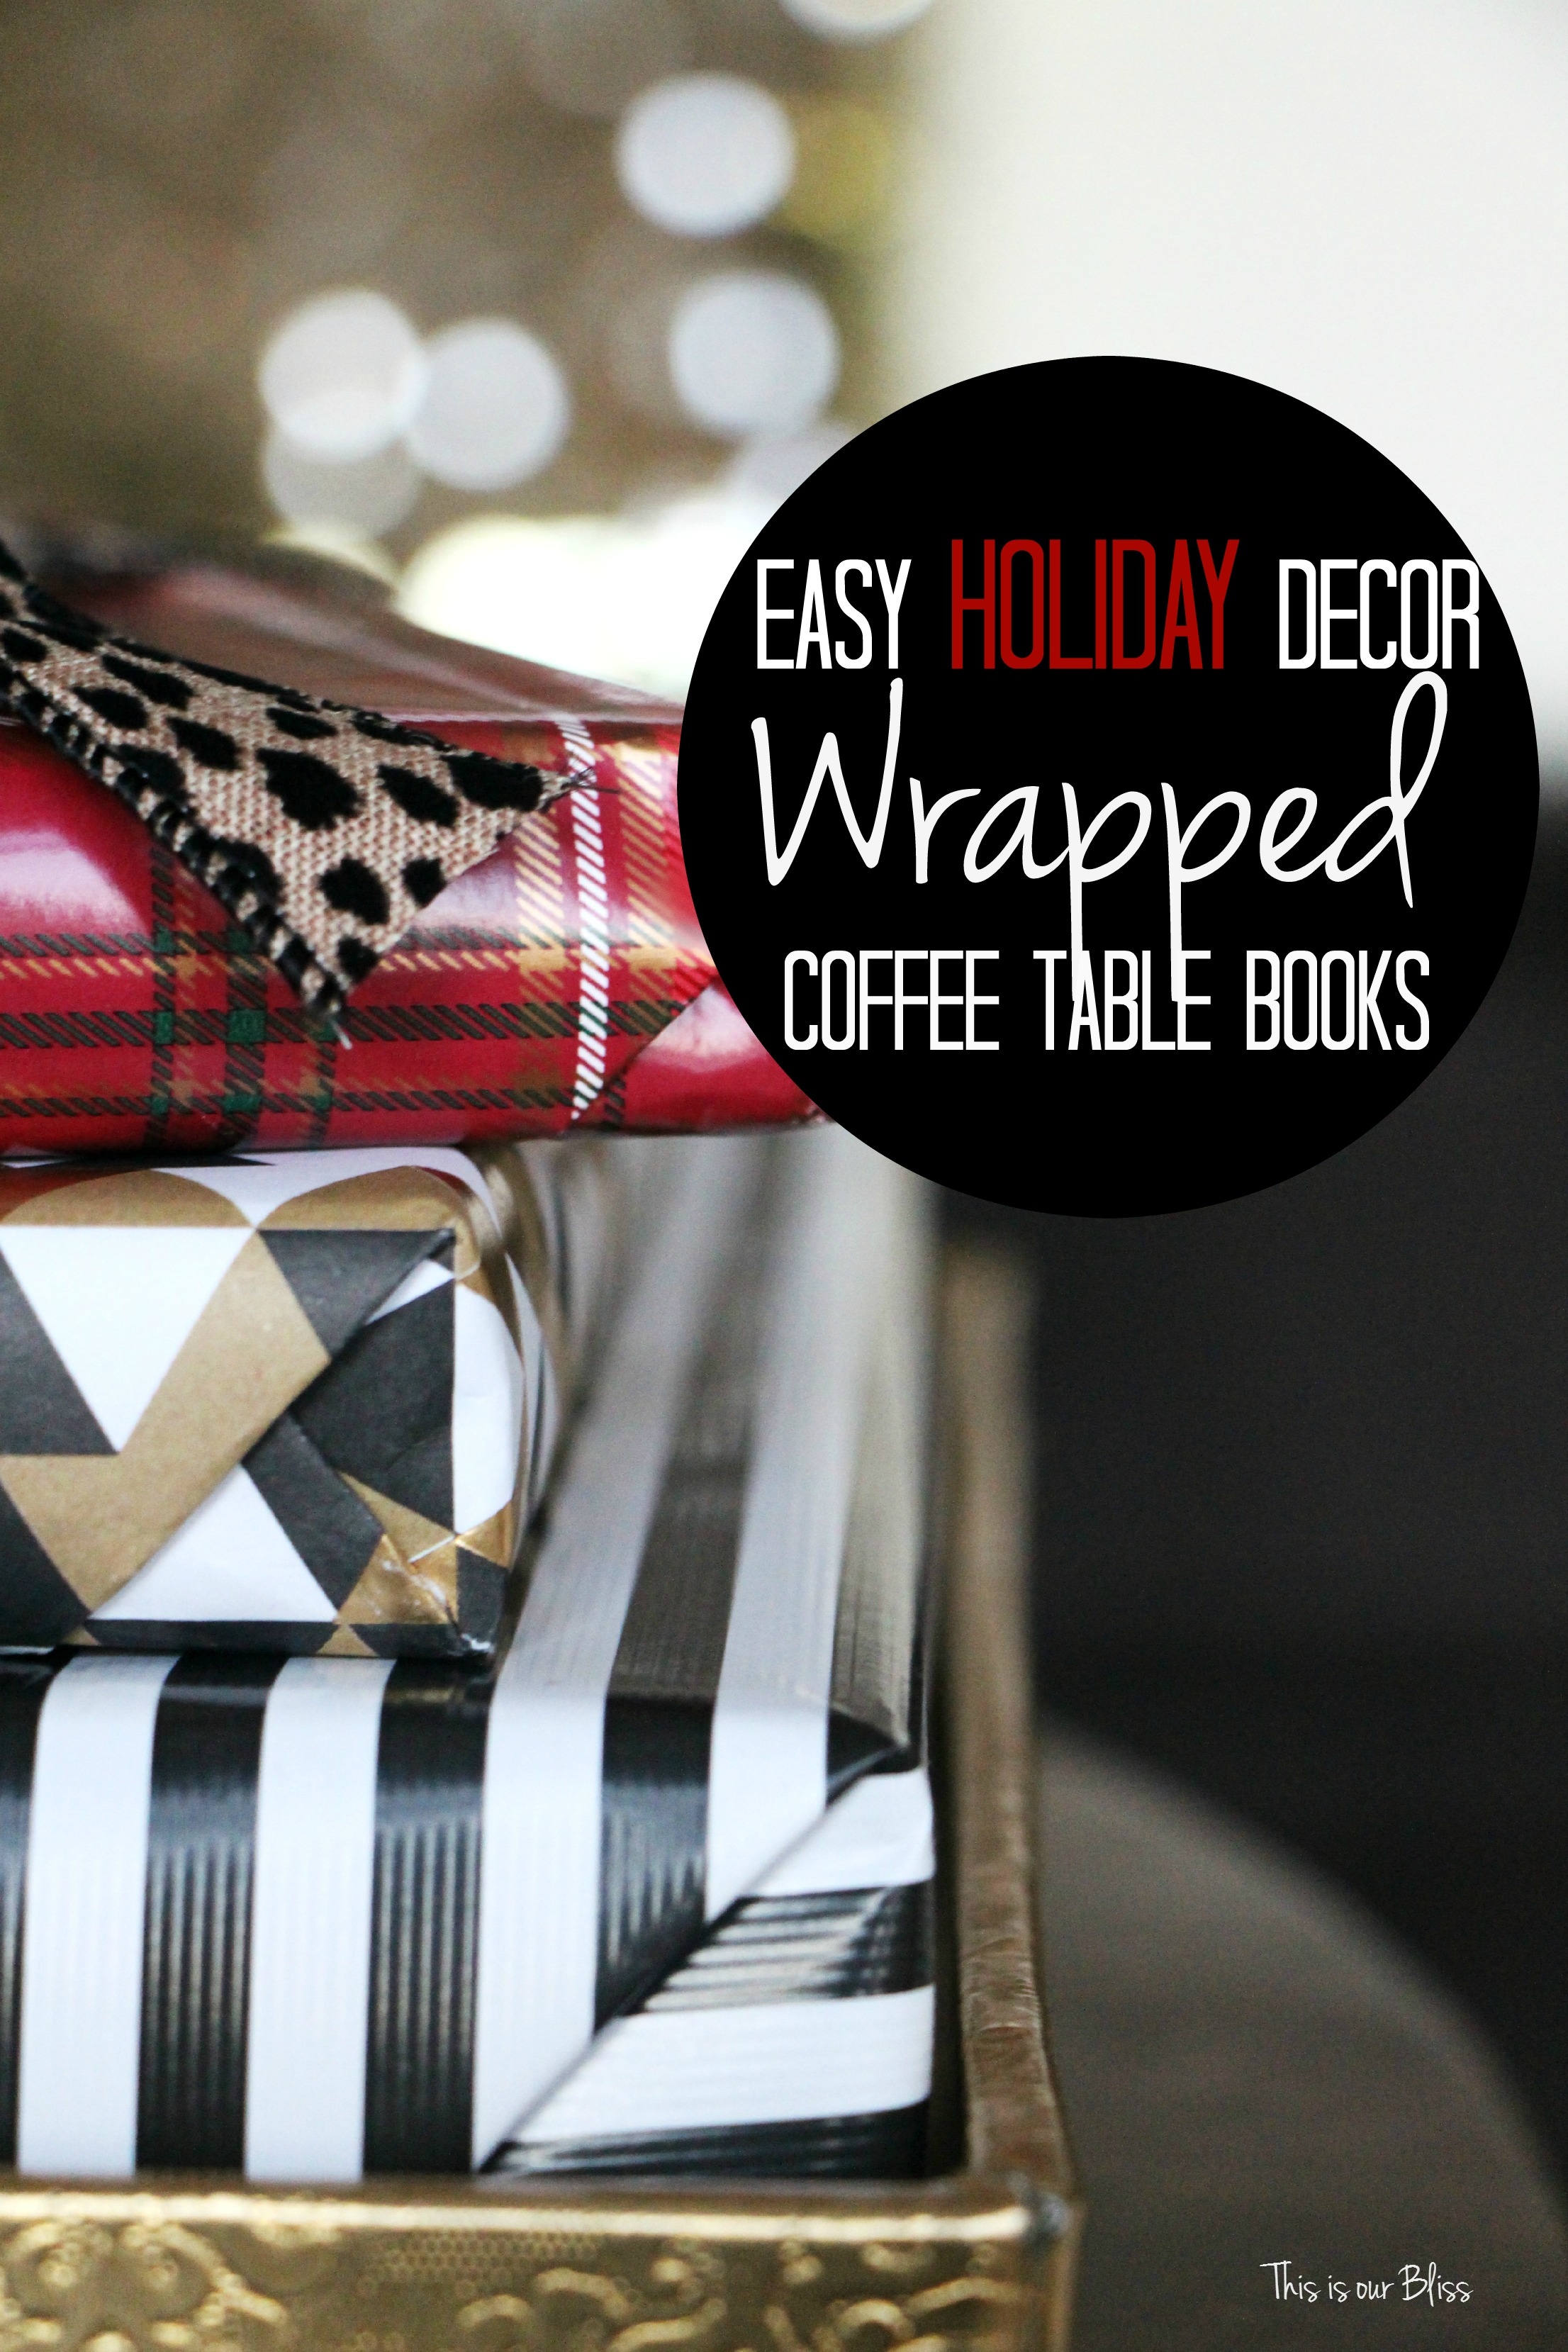 easy holiday decor - easy holiday decorating - wrapped coffee table books - this is our bliss